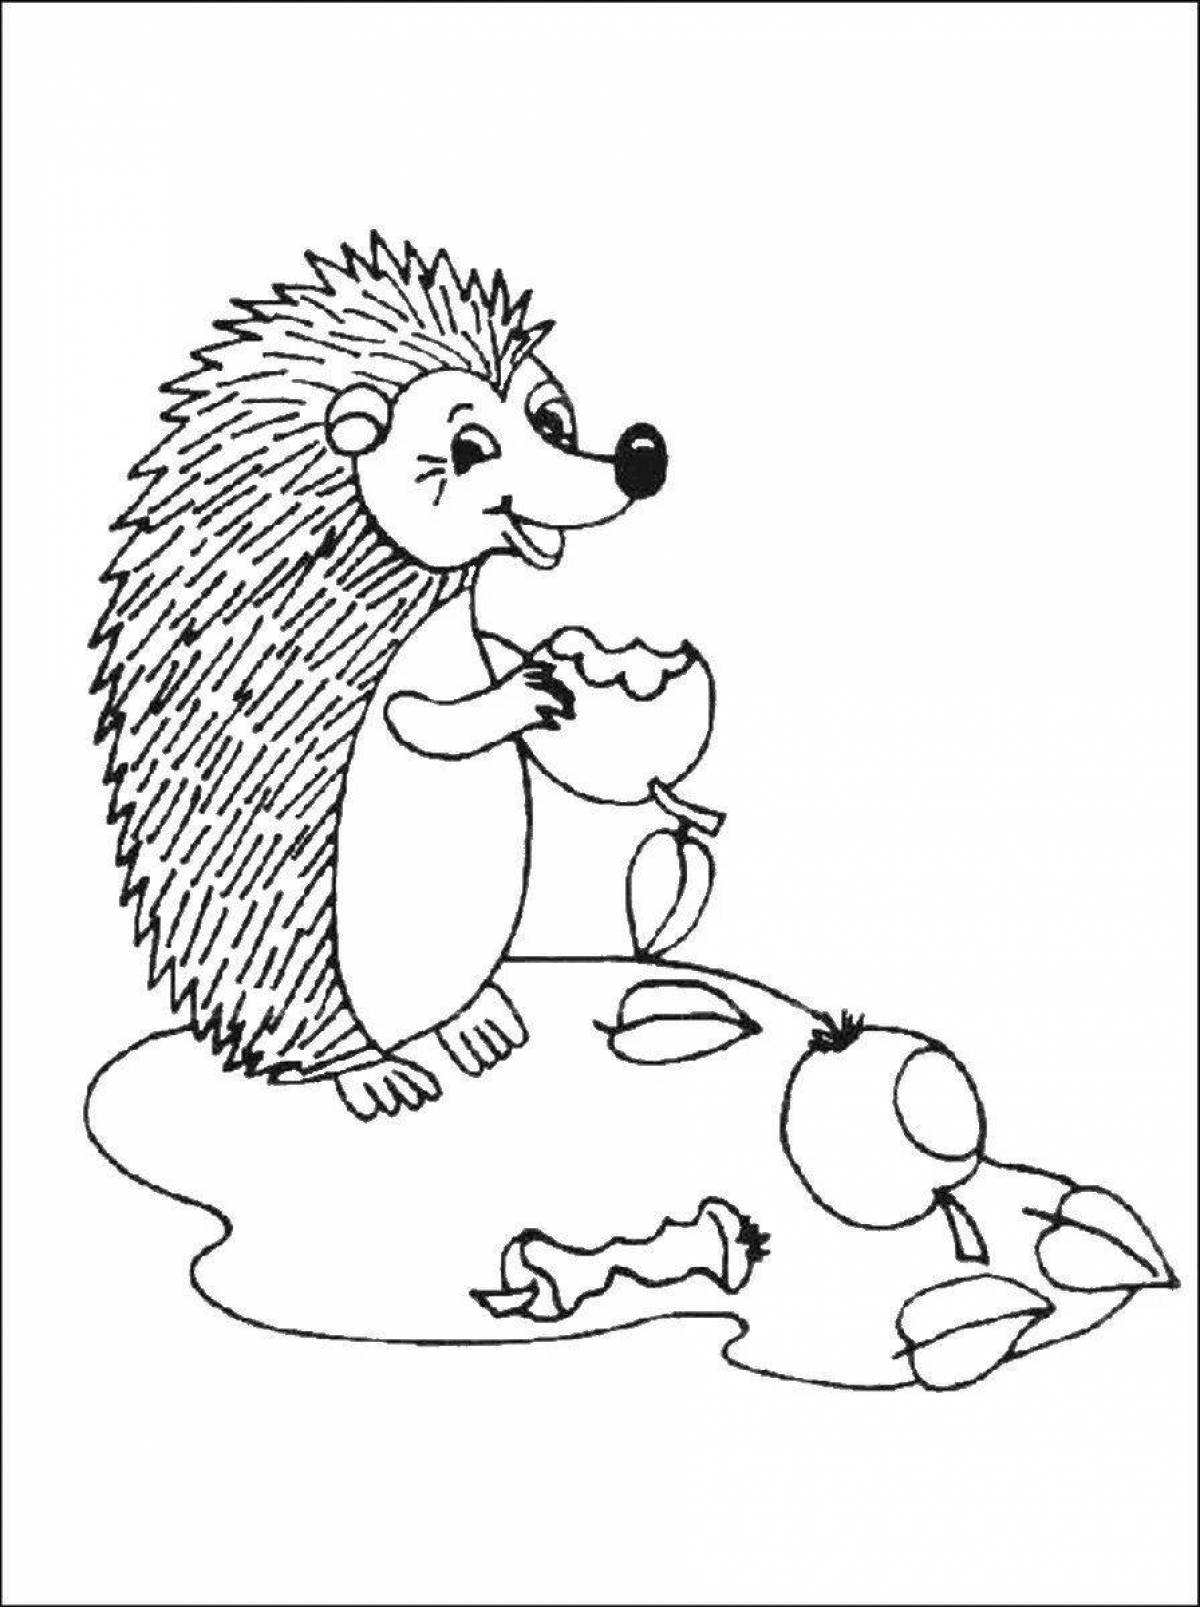 Glittering hedgehog coloring page